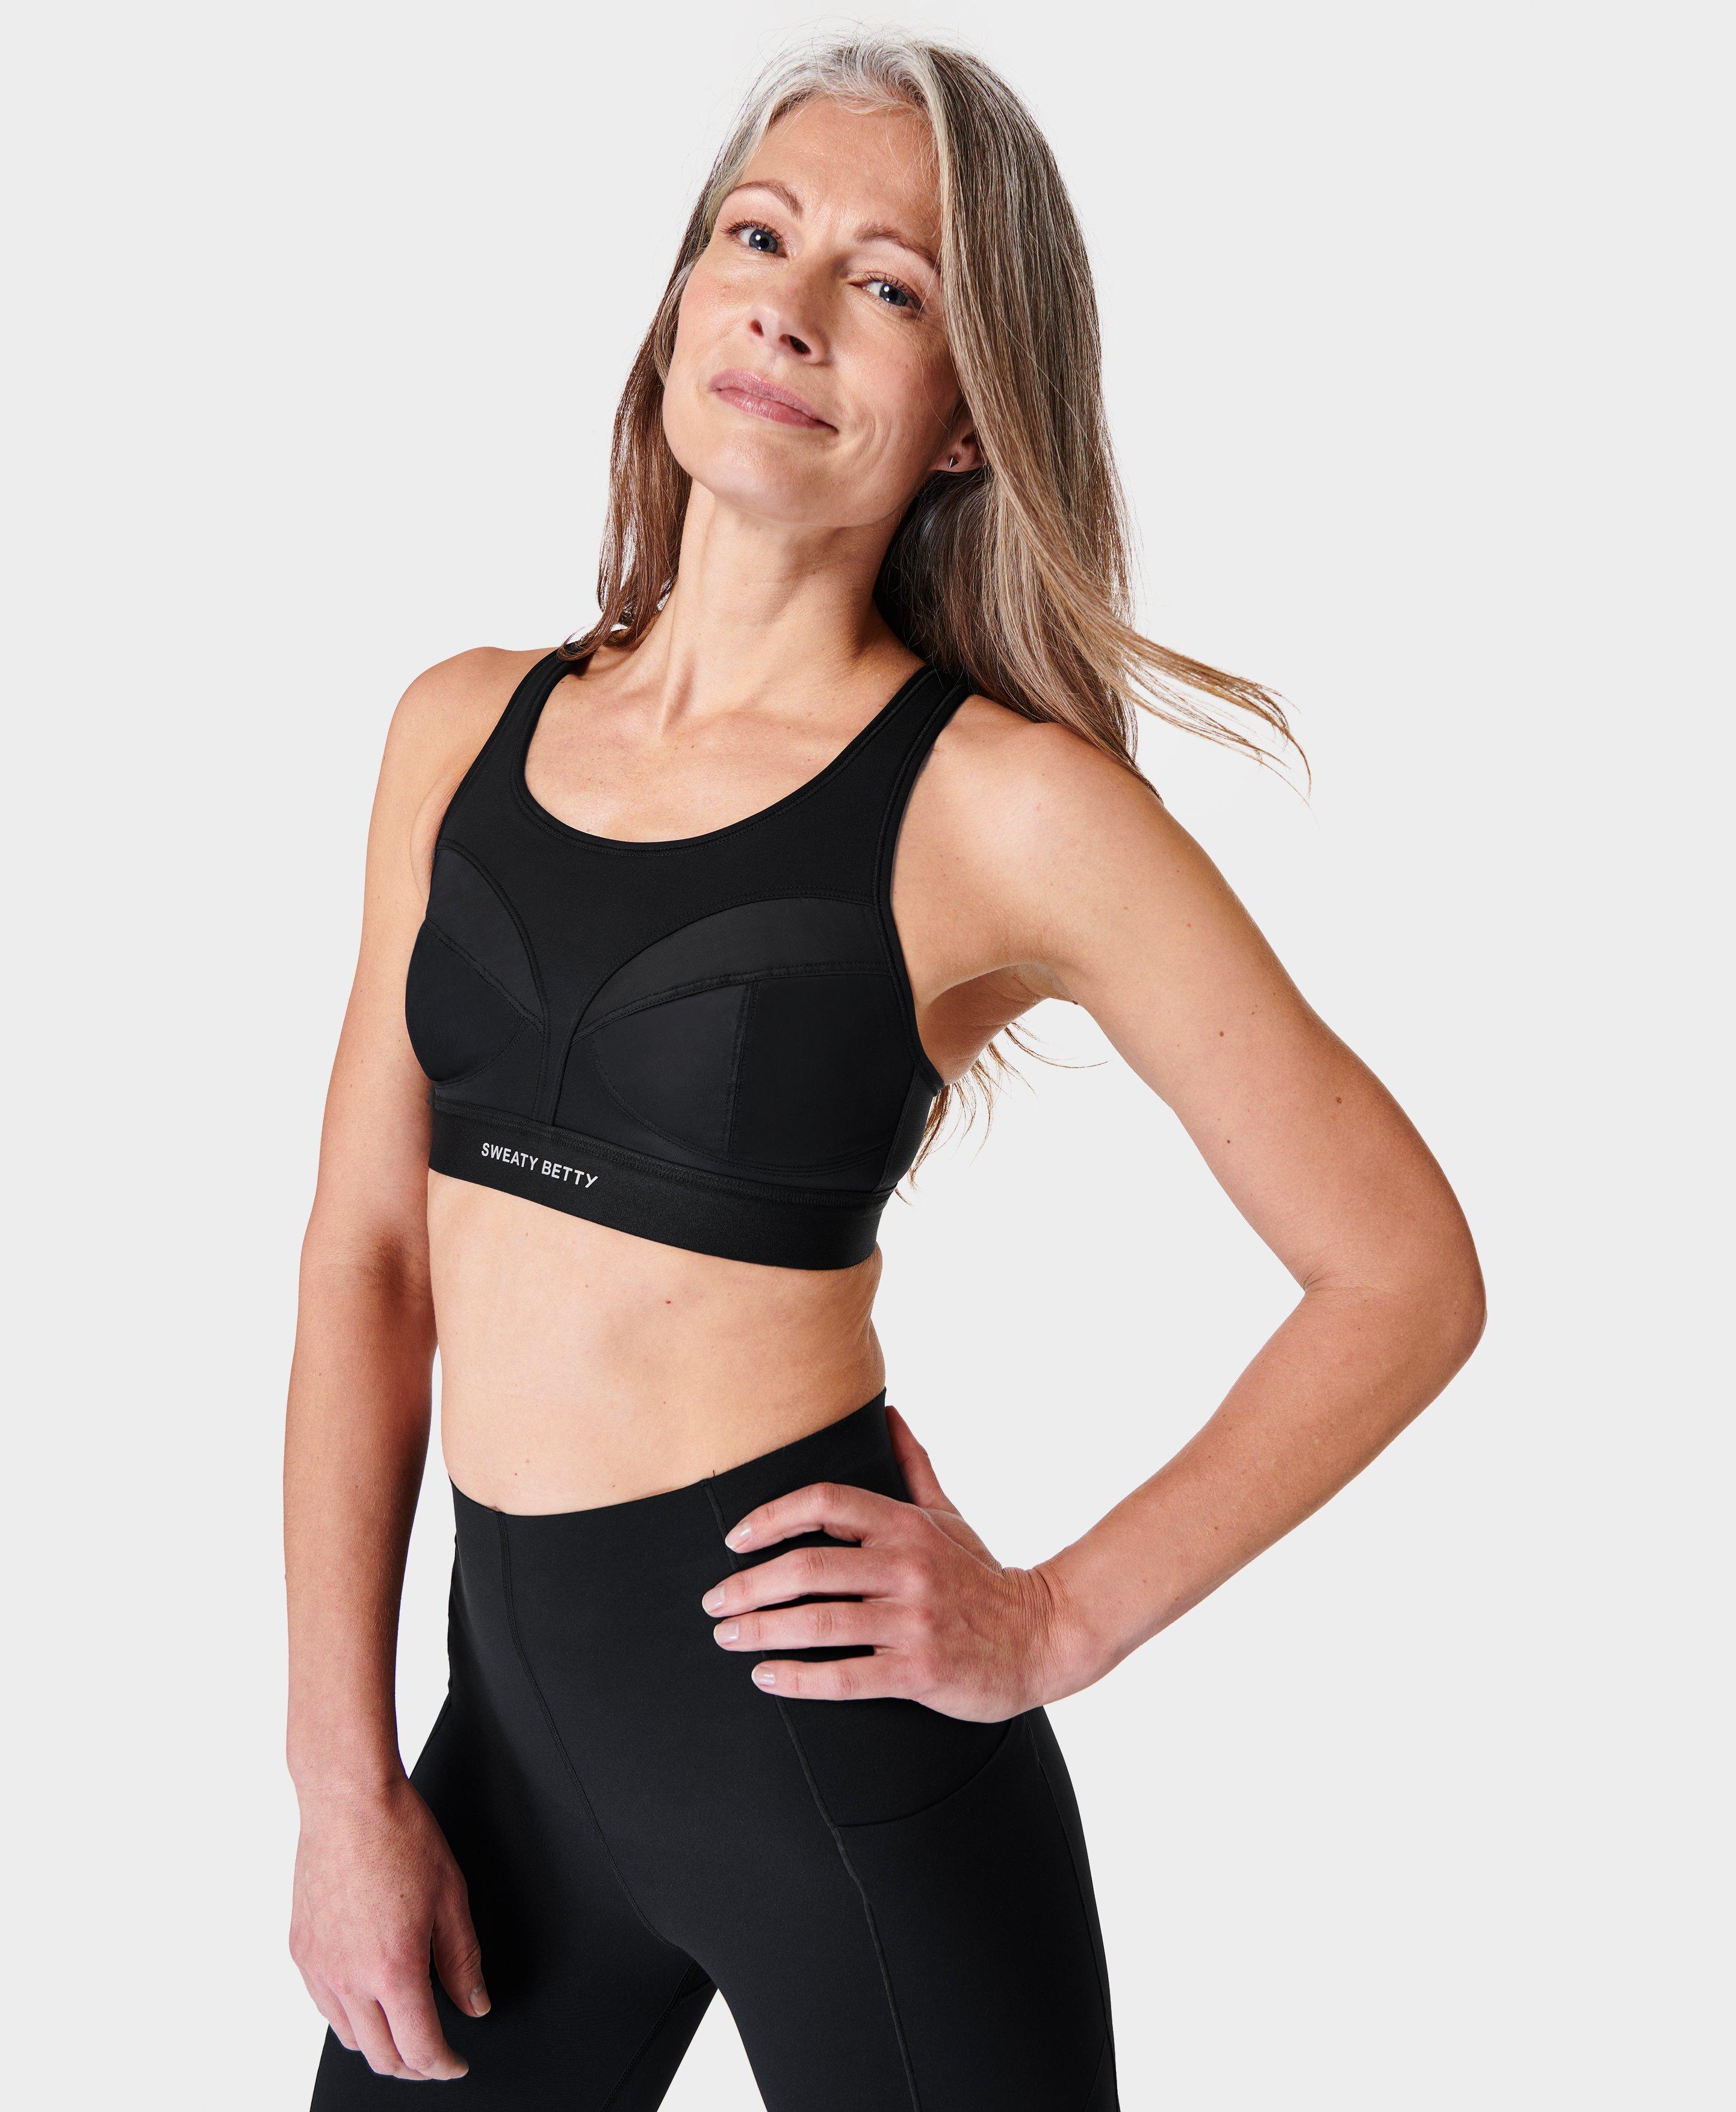 Pro Absorb Sweat Top Athletic Running Sports Bra, Gym Fitness